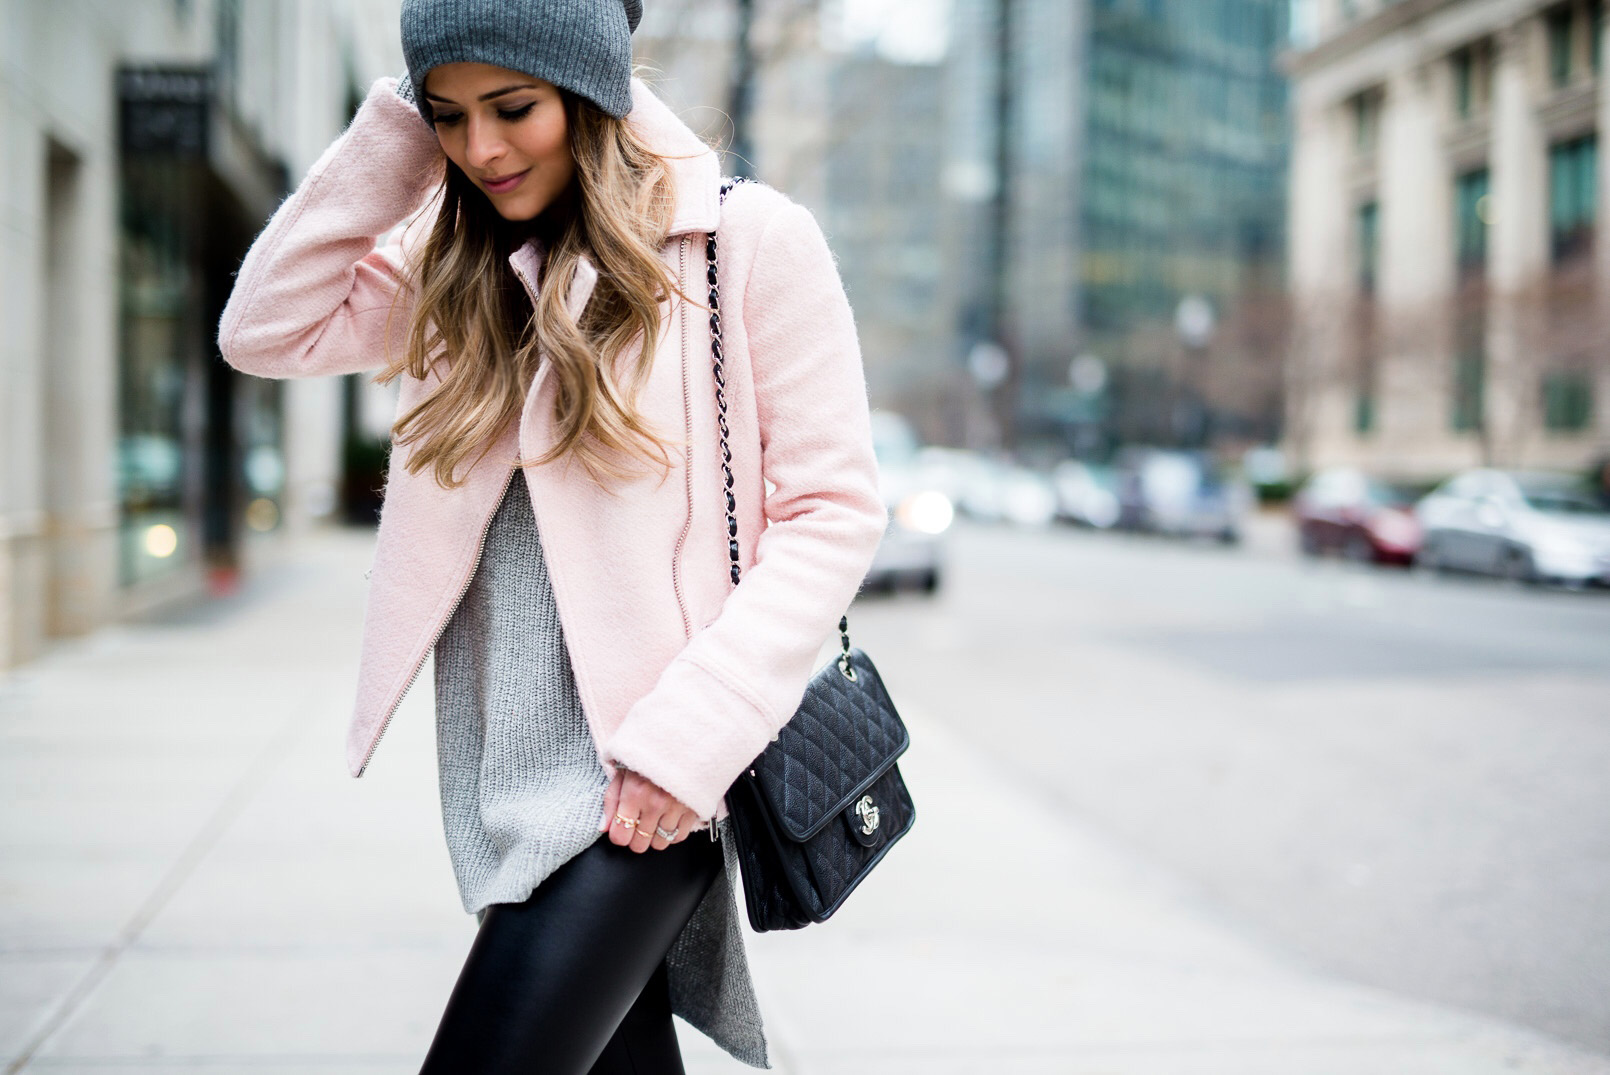 Asos-Pink-Jacket-Faux-Leather-Leggings-Reiss-Boots-BP-Grey-Beanie-Chanel-French-Riviera-Flap-Grey-Sweater-Boston-7